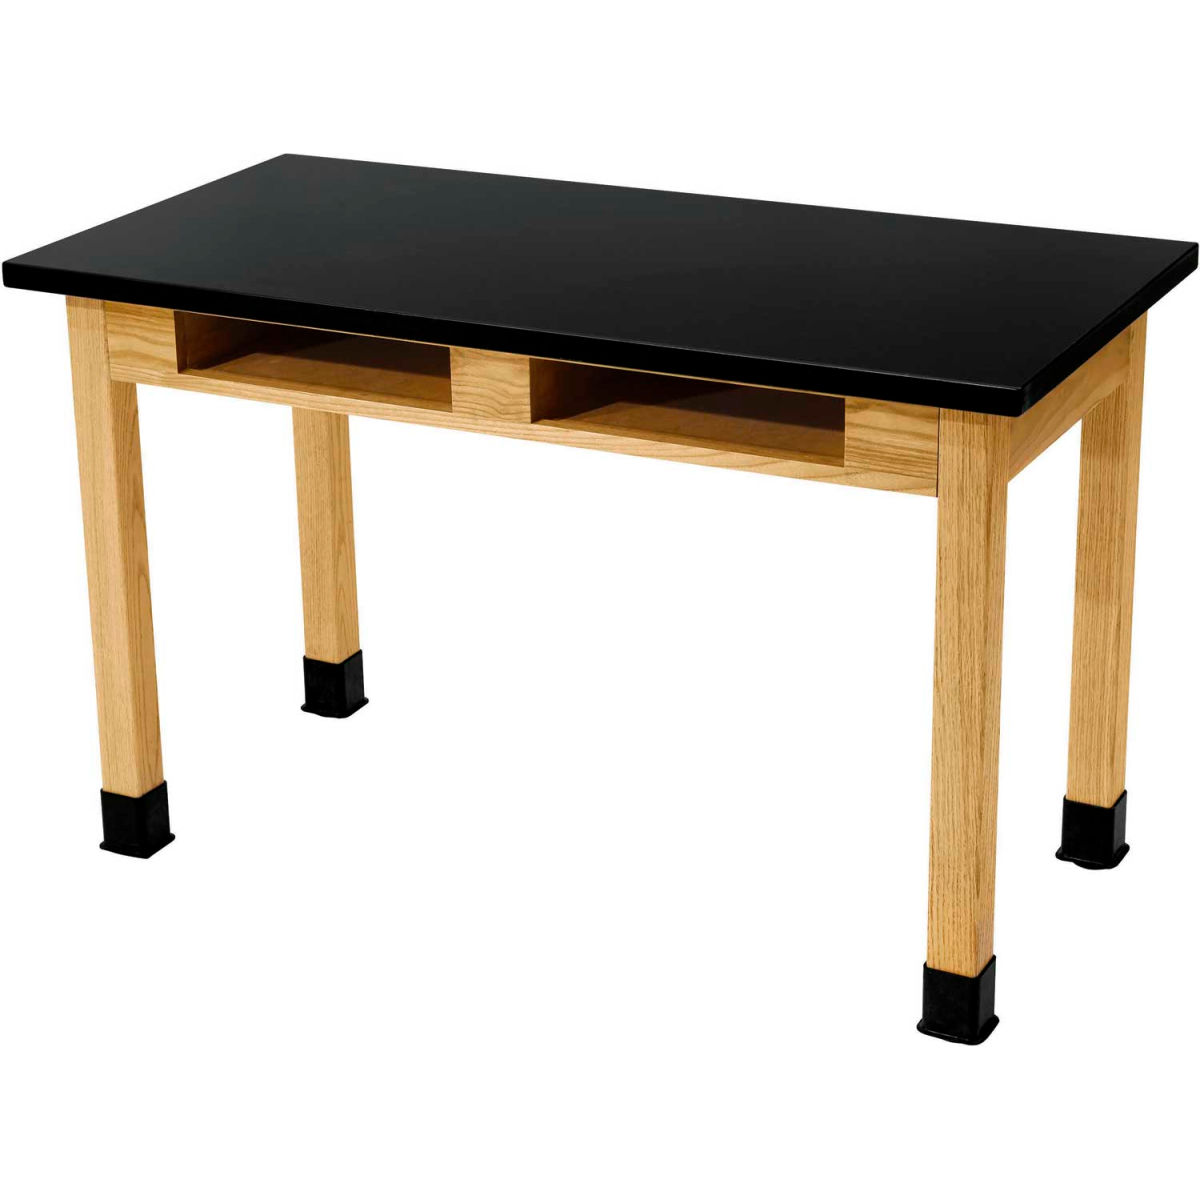 B1109972 Science Lab Table with Compartment & Chemical Resistant Top - Black with Oak Leg - 72 x 30 x 36 in -  National Public Seating